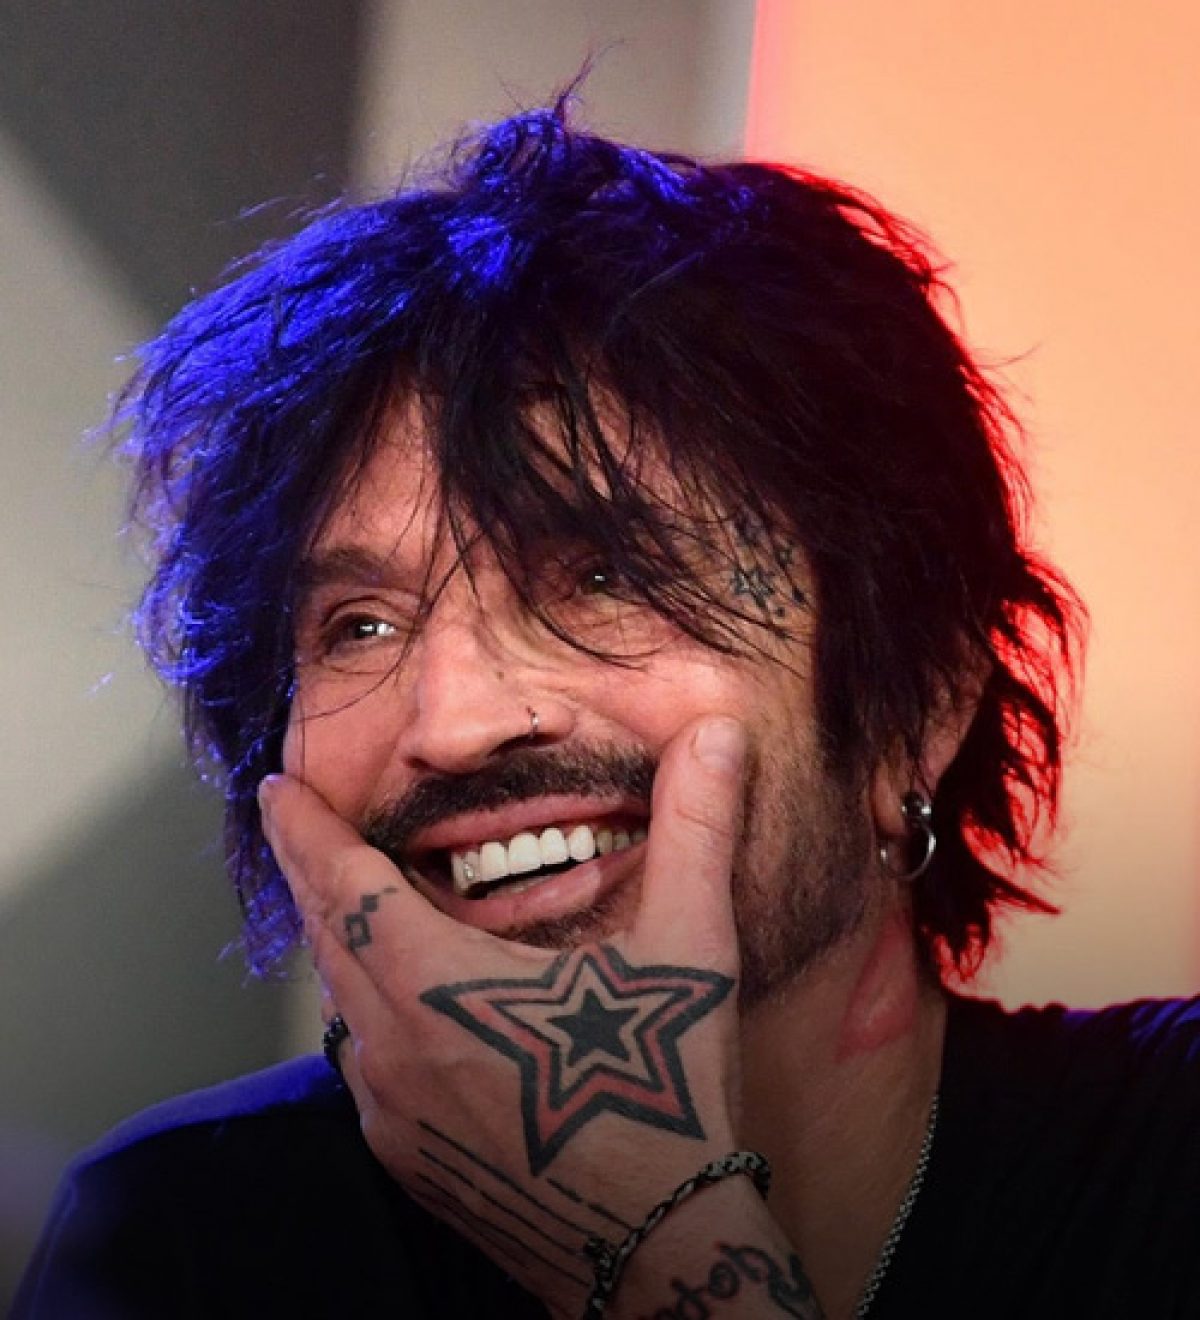 Tommy Lee was 'drinking 2 gallons' of vodka a day